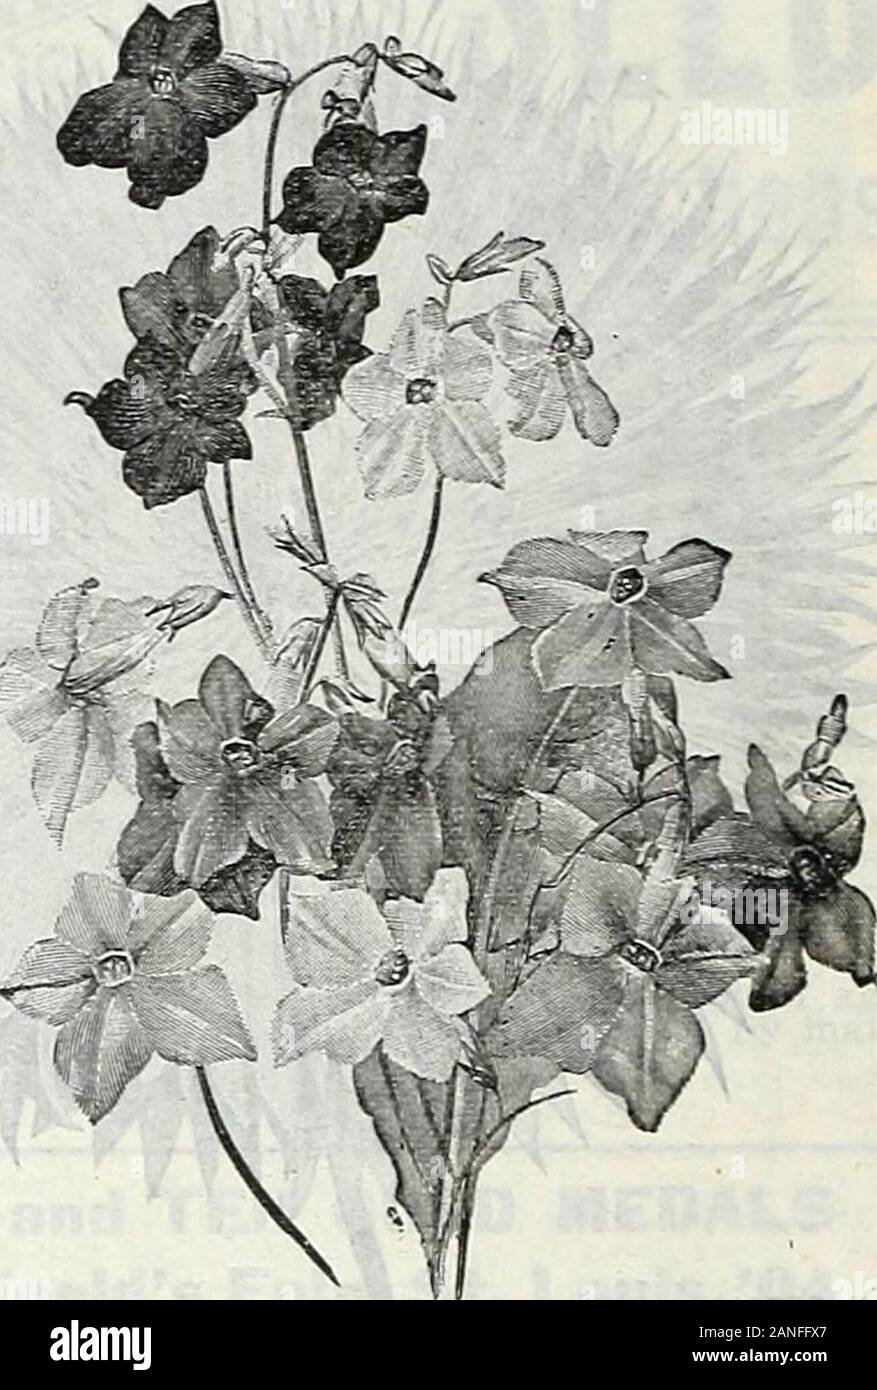 Farm and garden annual, spring 1906 . SCABIOSA JAPONICA. NICOTIANA HYBRIDS OF SANDERAE. SCABIOSA JAPONICA. A hardy perennial Scabious or Mourn-ing Bride, from Japan, forming largemany-branched bushes of about 2% feetin height. The flowers are borne on long,wiry stems 15 to 20 inches in length andmany of them measuring 22 inchesacross of a beautiful lavender blue color.The plants are extremely free flowering,producing lovely flowers from June untillate in fall. Excellent for cut flowerwork. Will not be at its best until thesecond year. Stock Photo